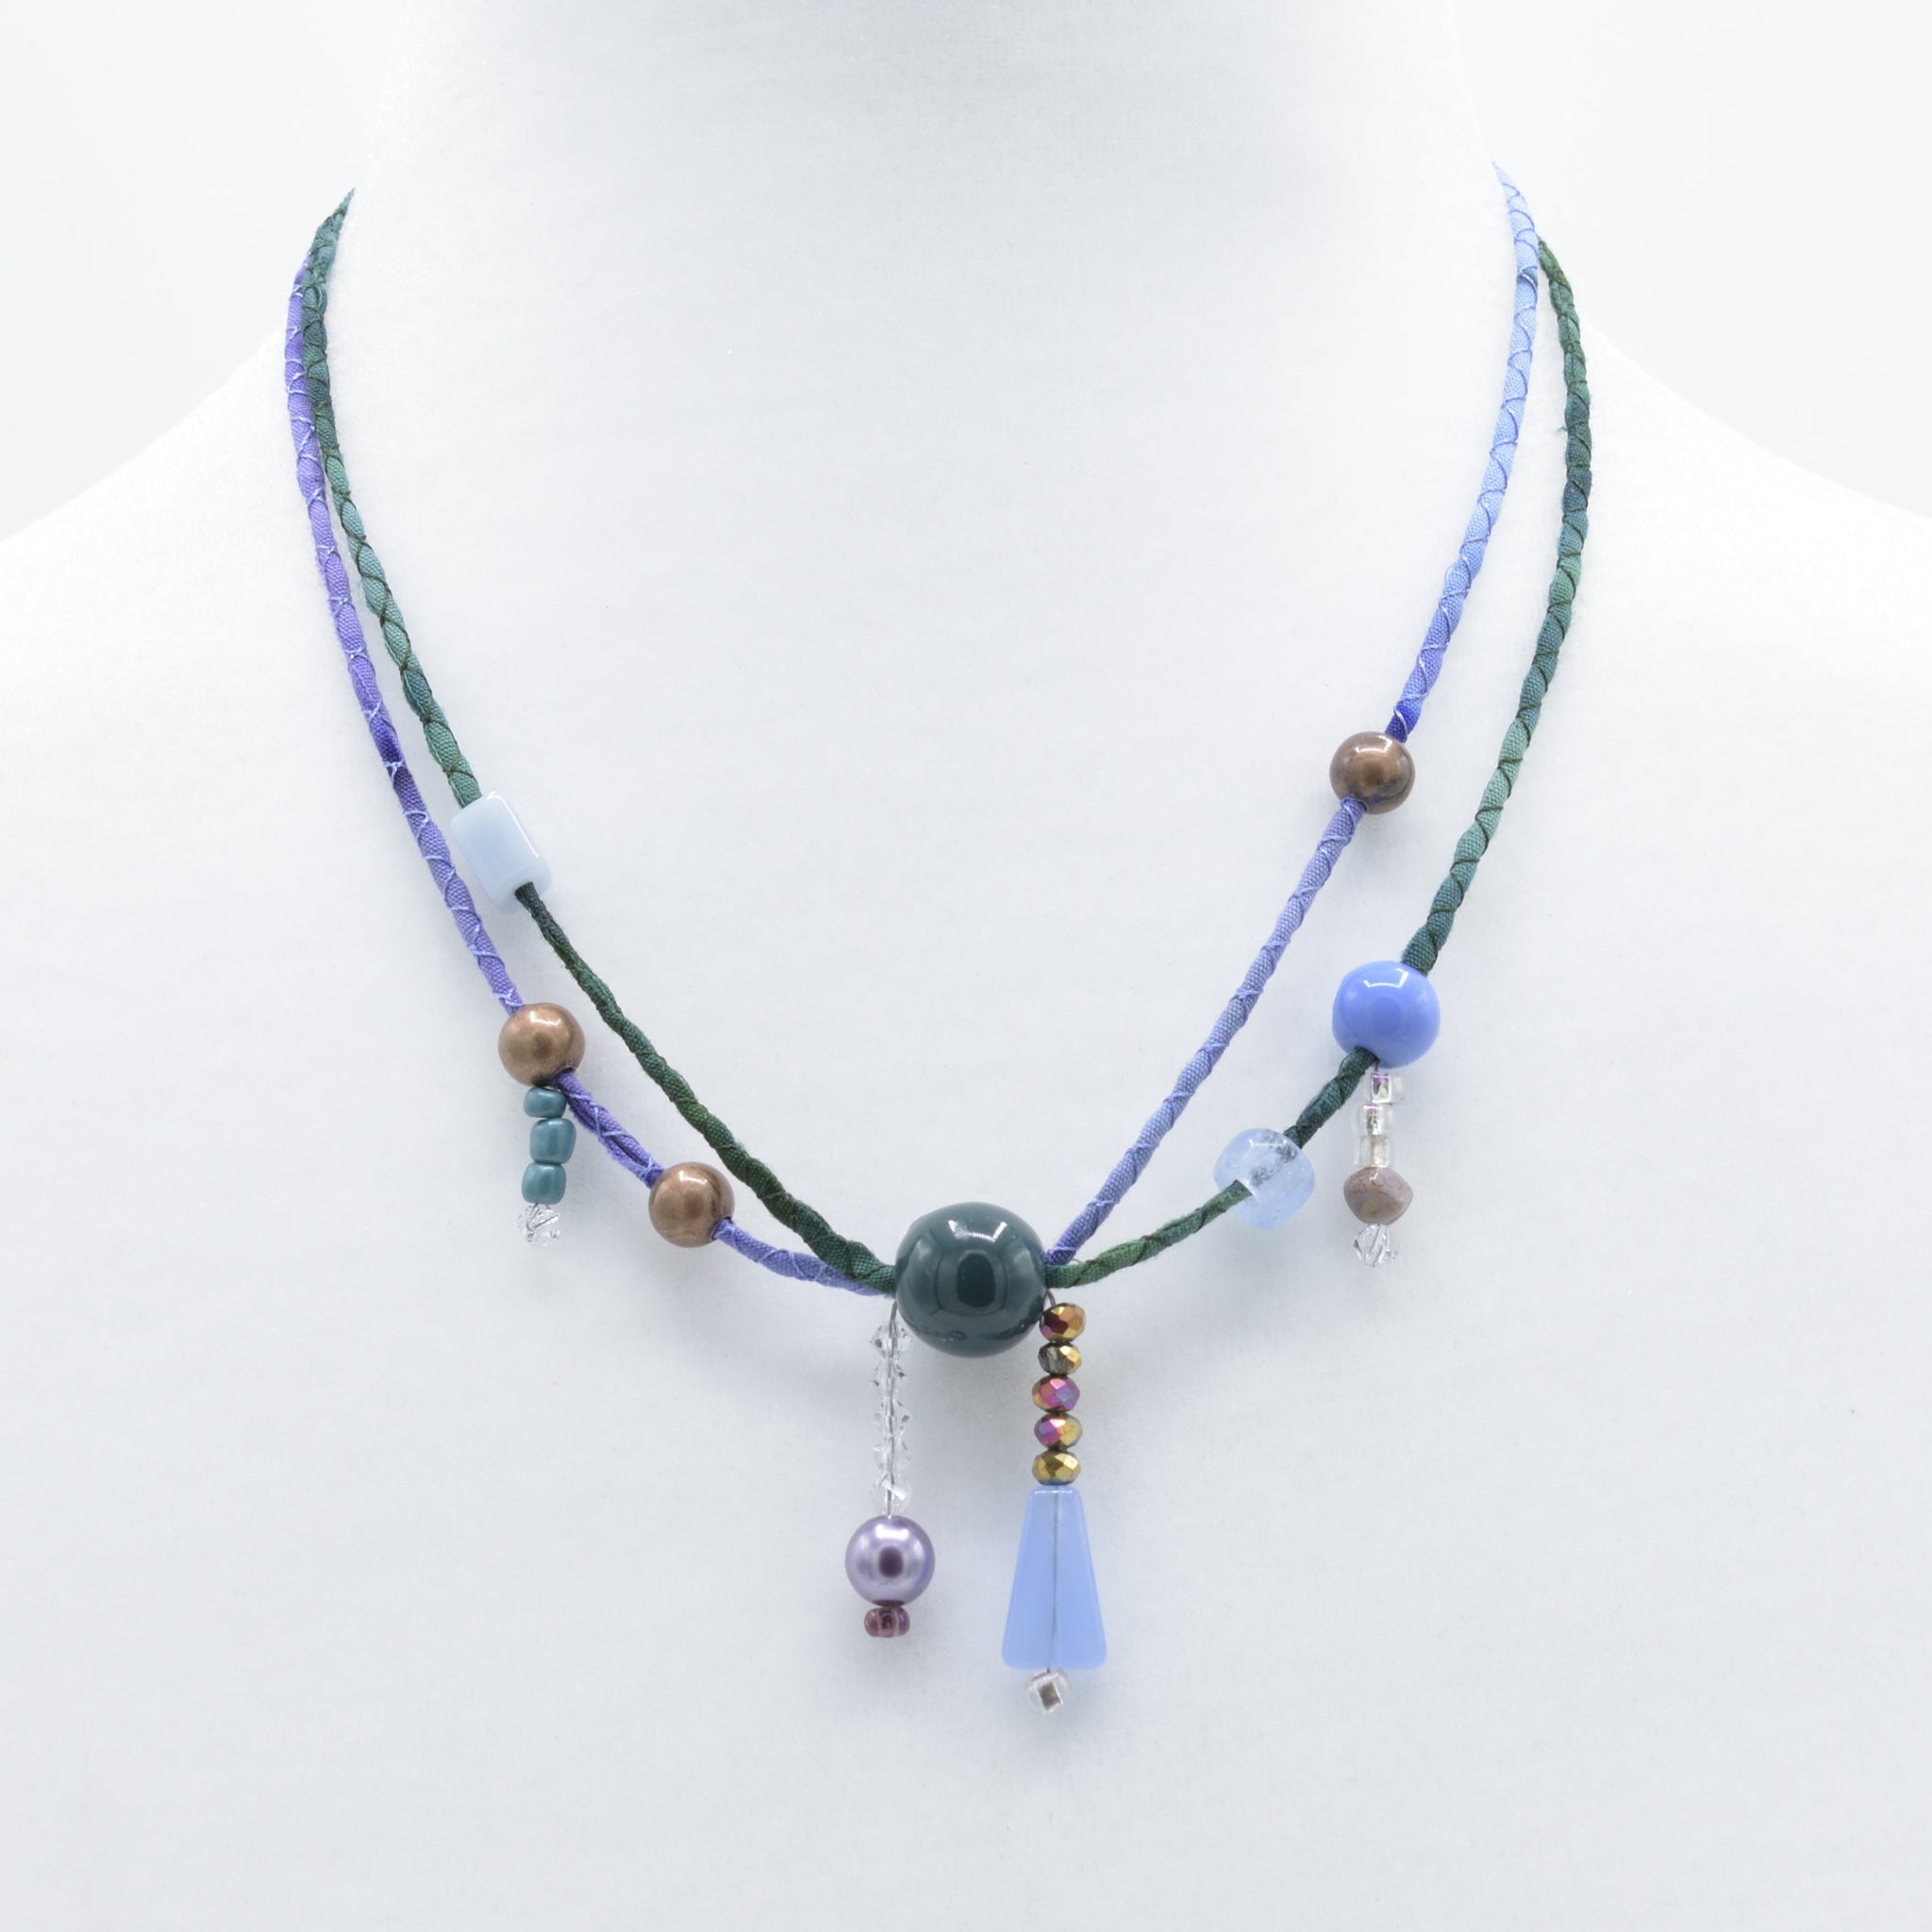 artisan hand crafted short necklace with hand sewn cords from cotton batik fabric embellished with crystals and beads 